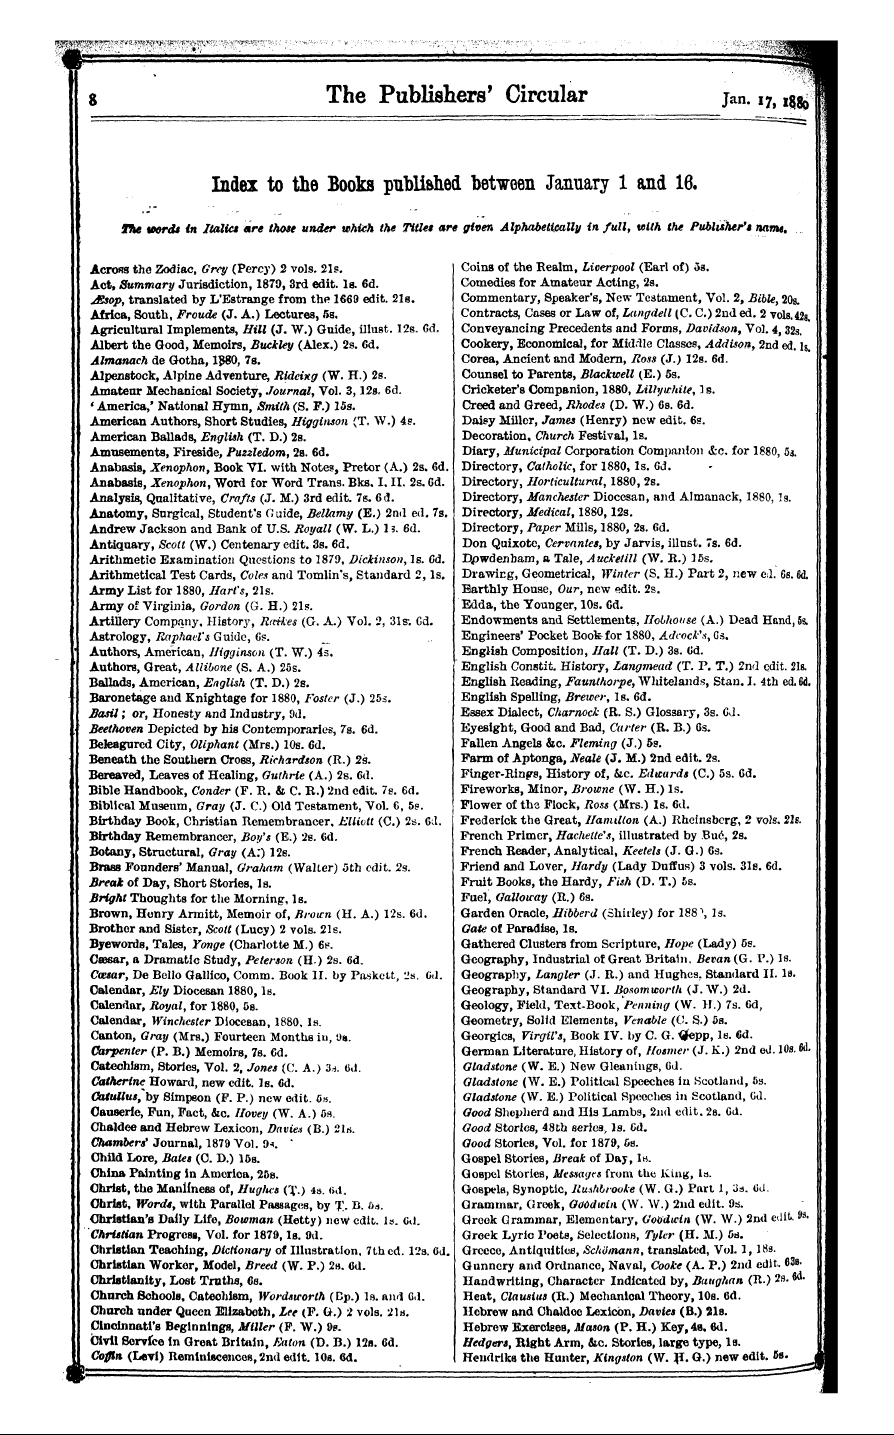 Publishers’ Circular (1880-1890): jS F Y, 1st edition - Index To The Books Published Between January 1 And 16, I The Itords In Italics Are Those Under Which The Titles Are Given Alphabetically In Full, With The Publisher's Name, I